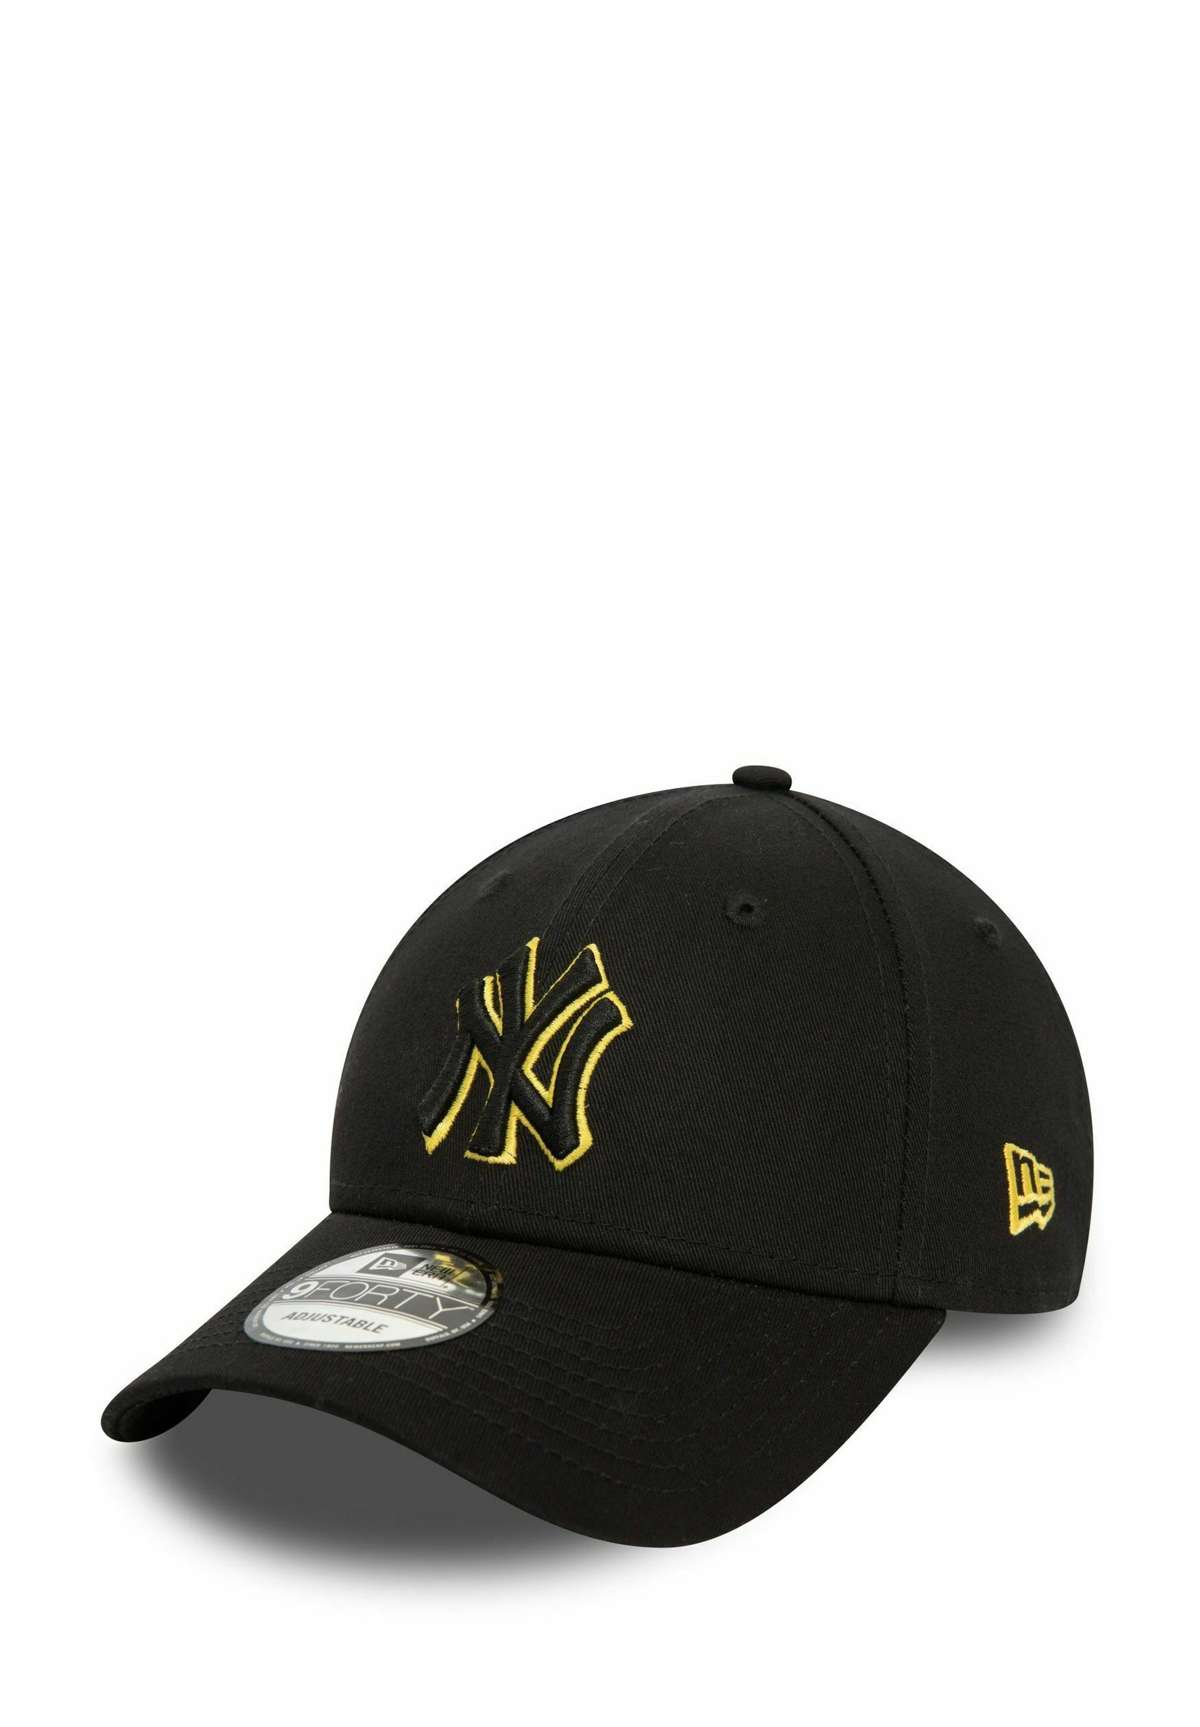 Кепка 9FORTY STRAPBACK OUTLINE YORK YANKEES